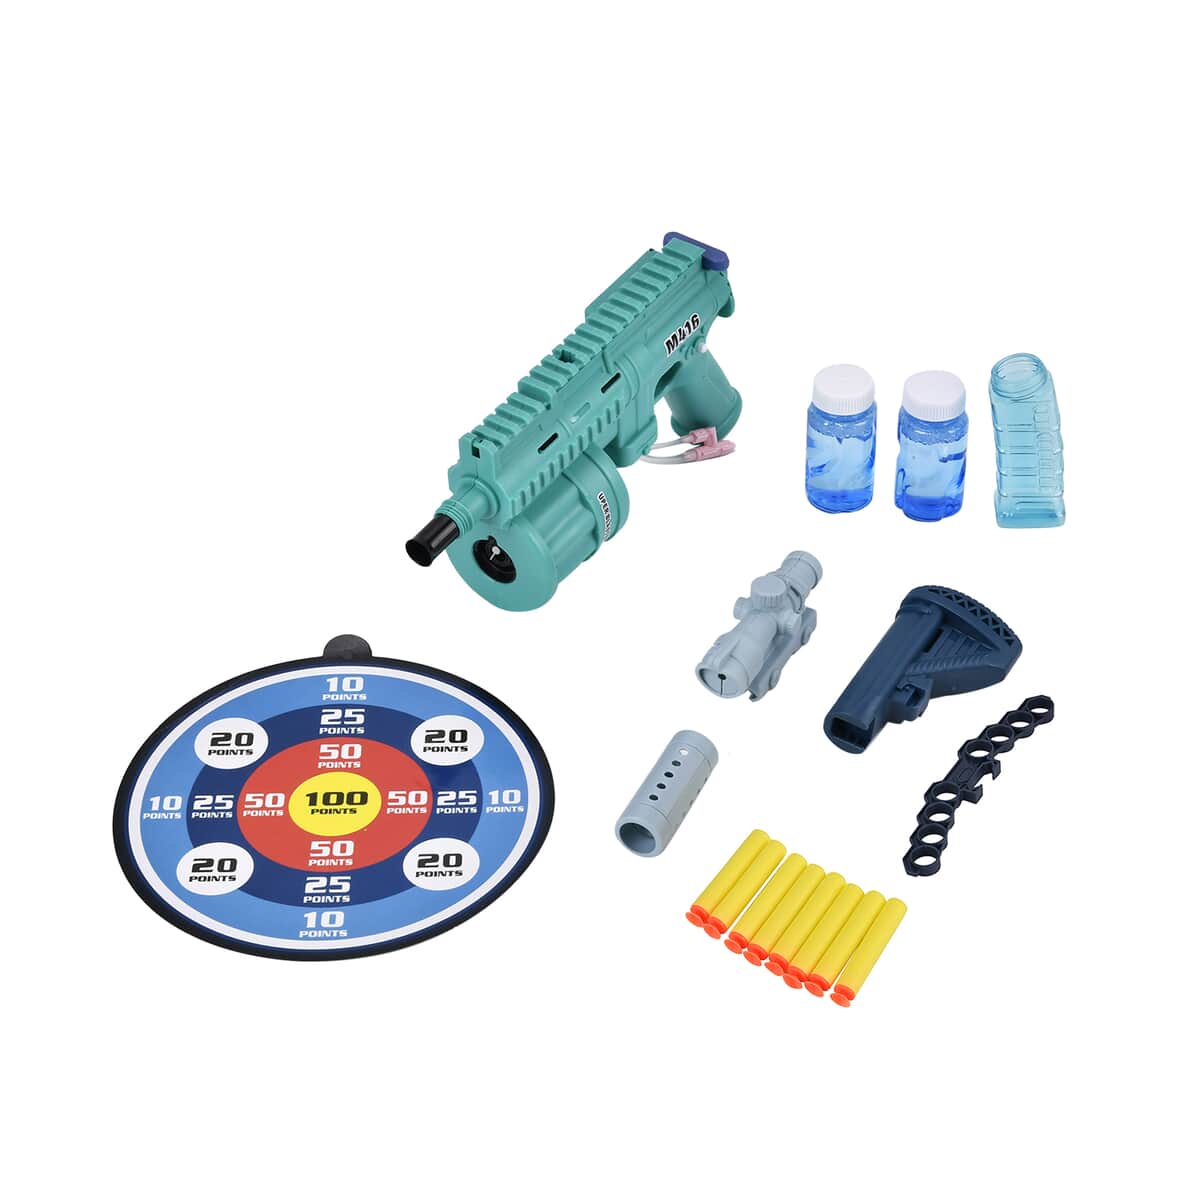 Multi Functional 3-in-1 Bubble Gun with Two Bottles of Bubble Liquid and 8 Soft Foam Bullets (16.53"x2.95"x9.44") (3 AA batteries Not Included) image number 5